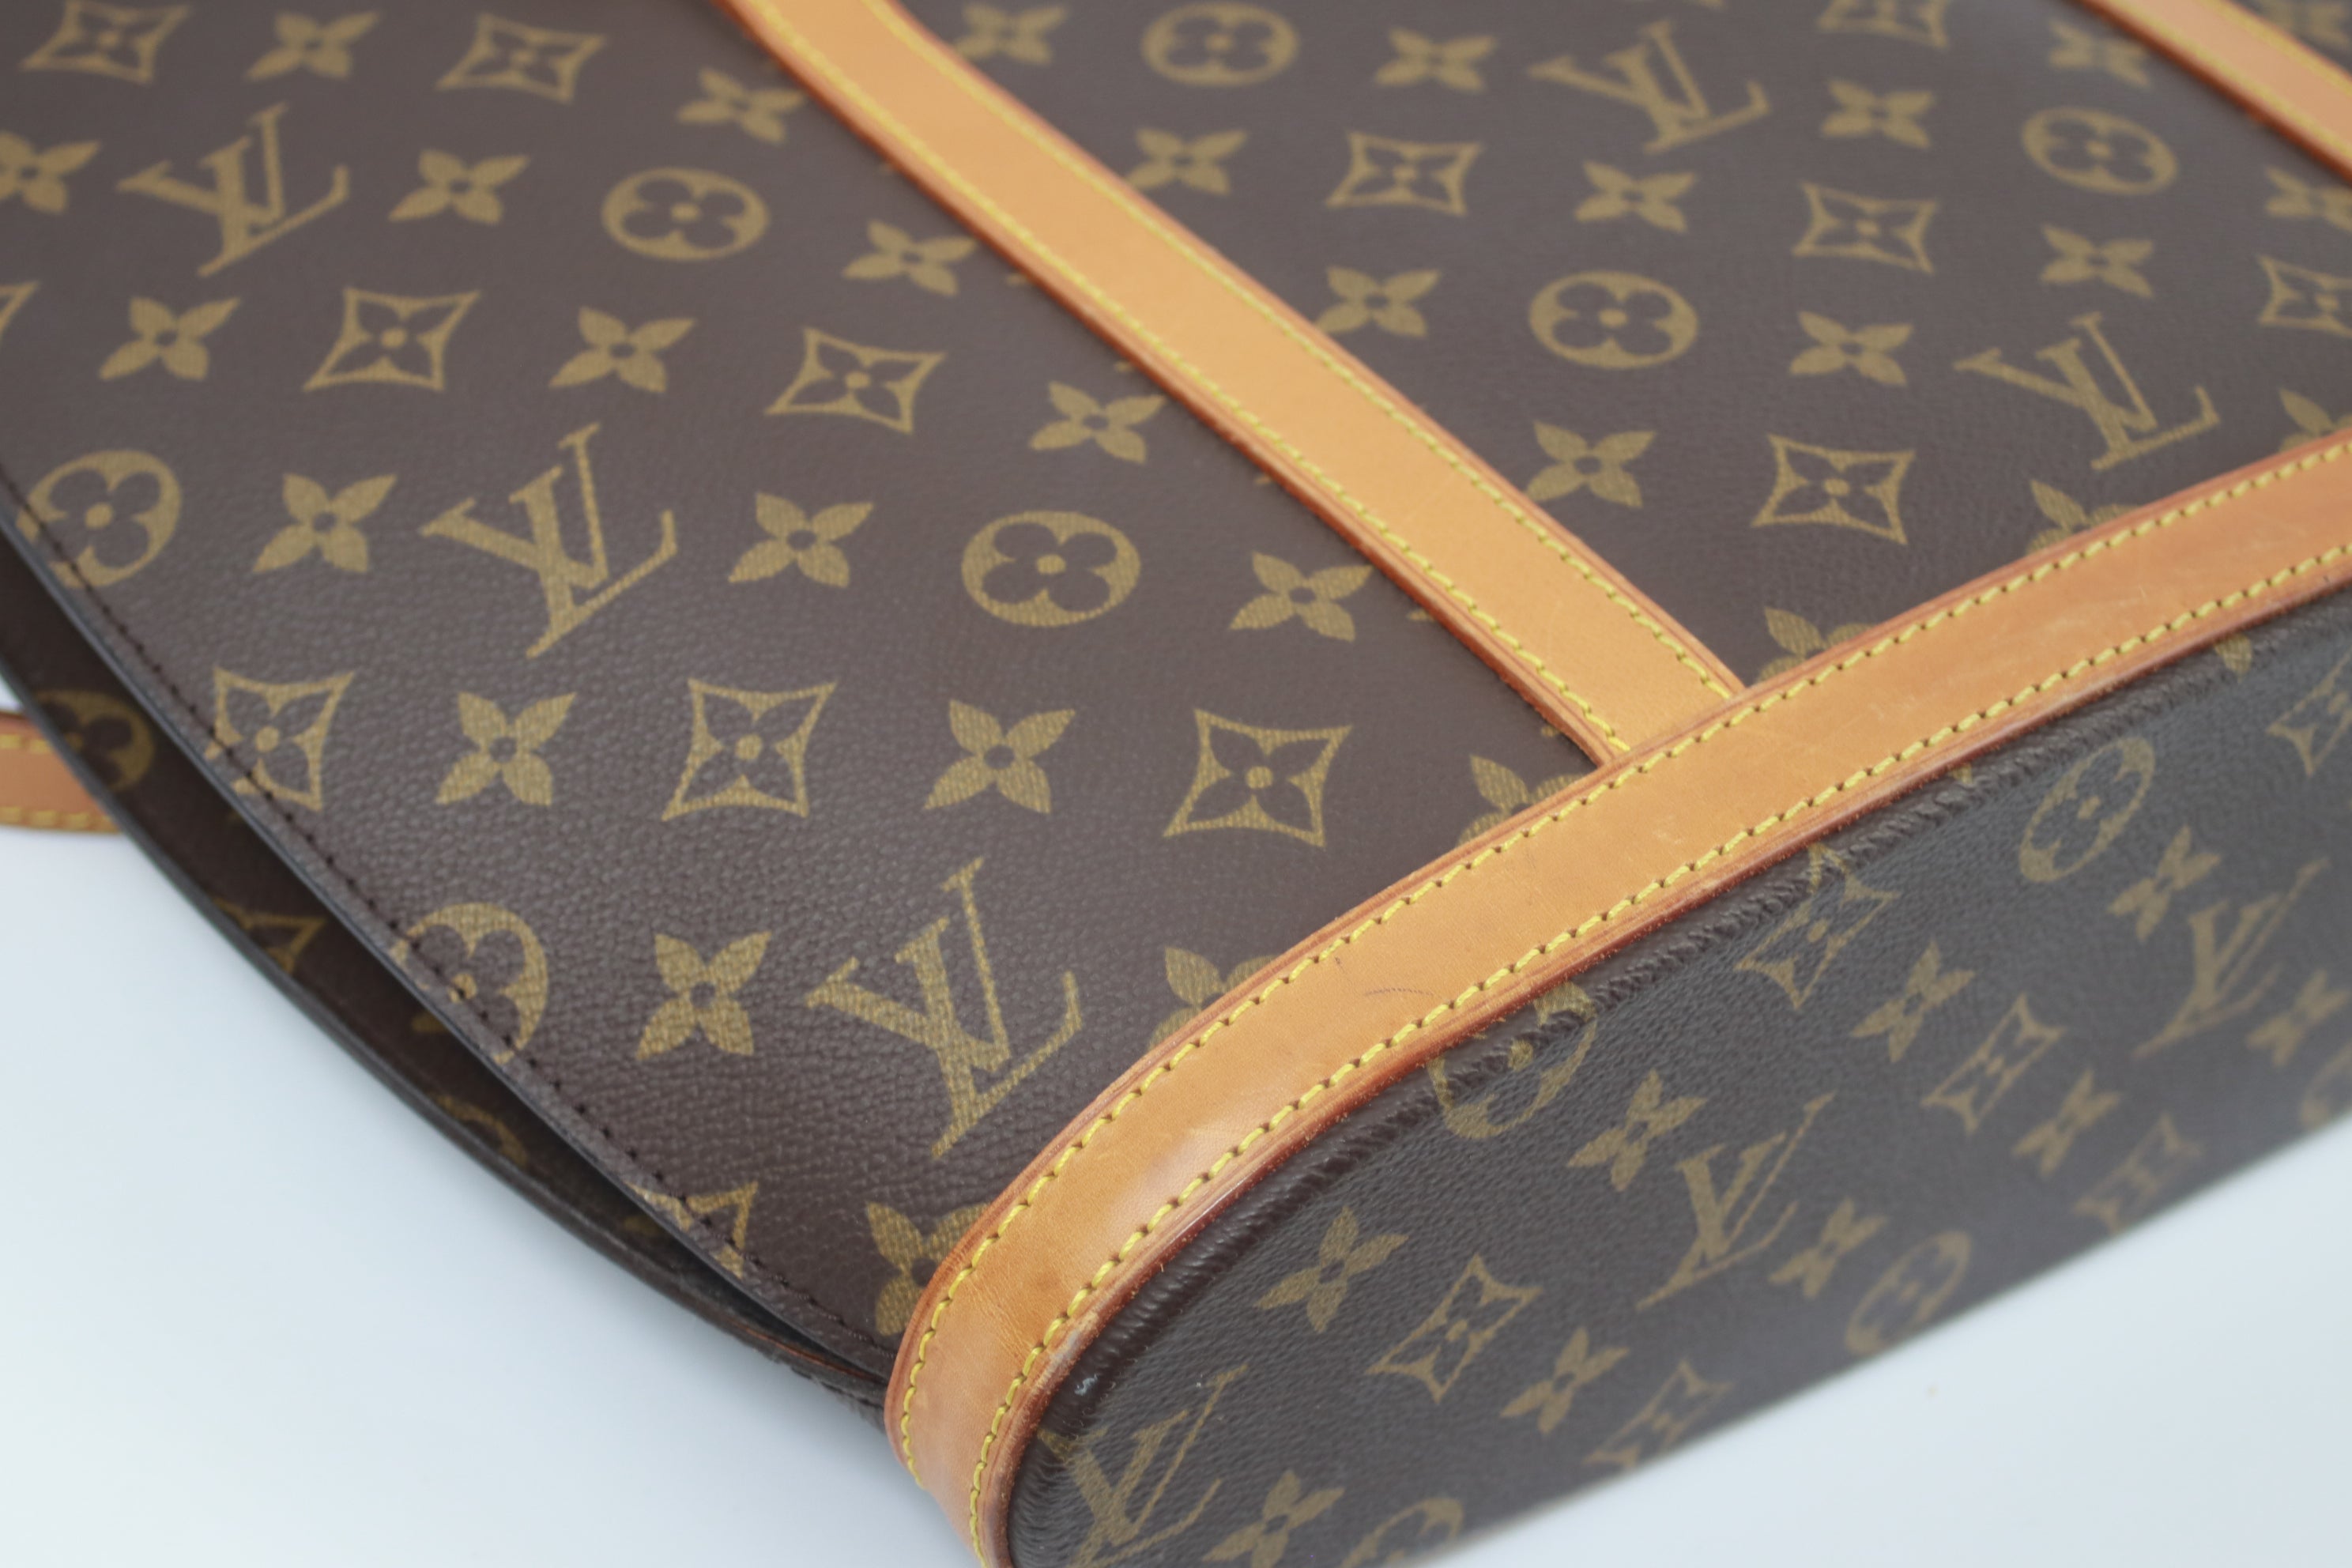 louie. vuitton purses for women used